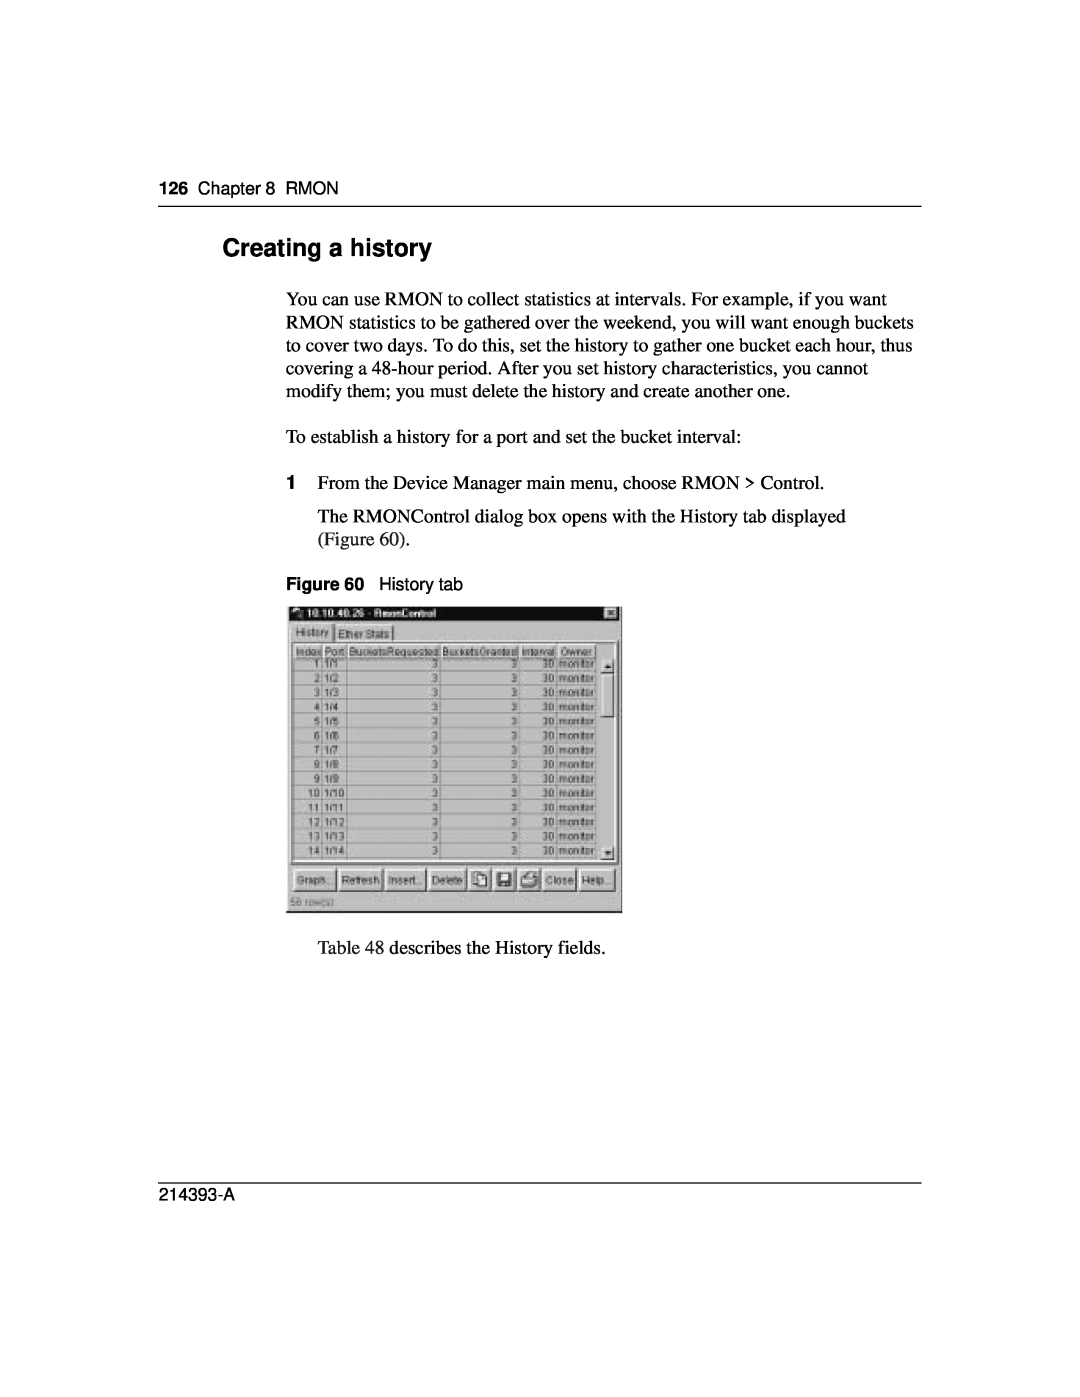 Nortel Networks 214393-A manual Creating a history 